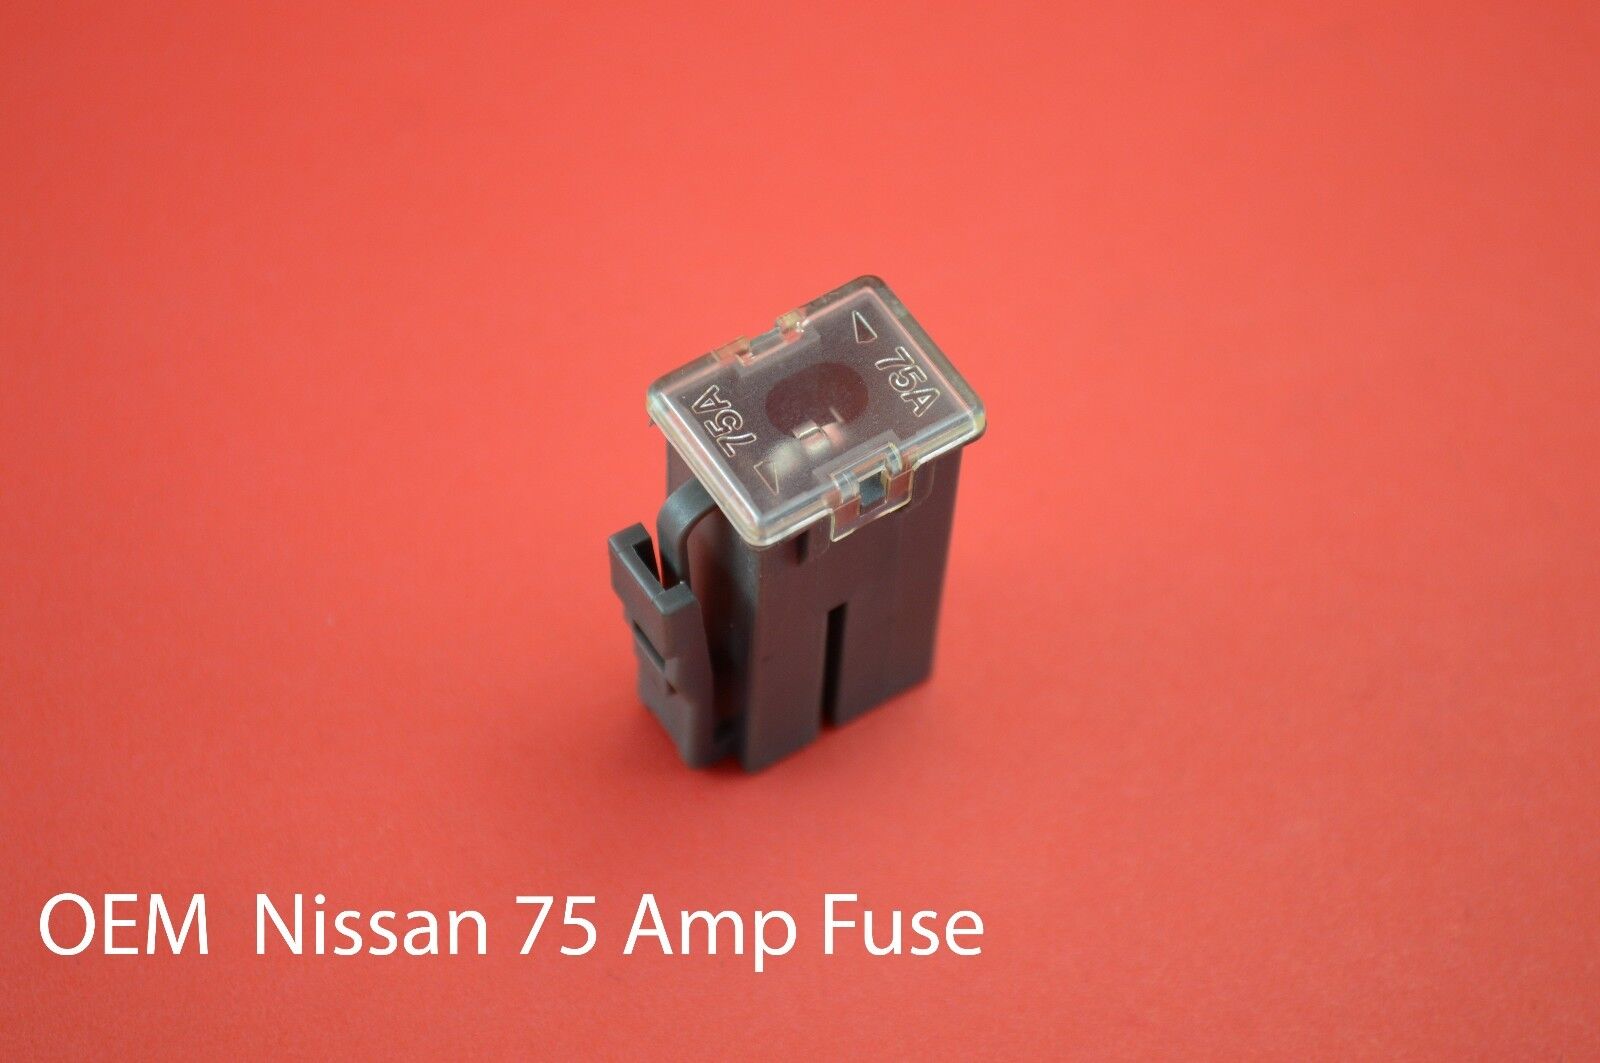 Nissan Stanza 300ZX Pathfinder FL75A 75A 75 AMP Fuse Nissan fuse Nissan fuses